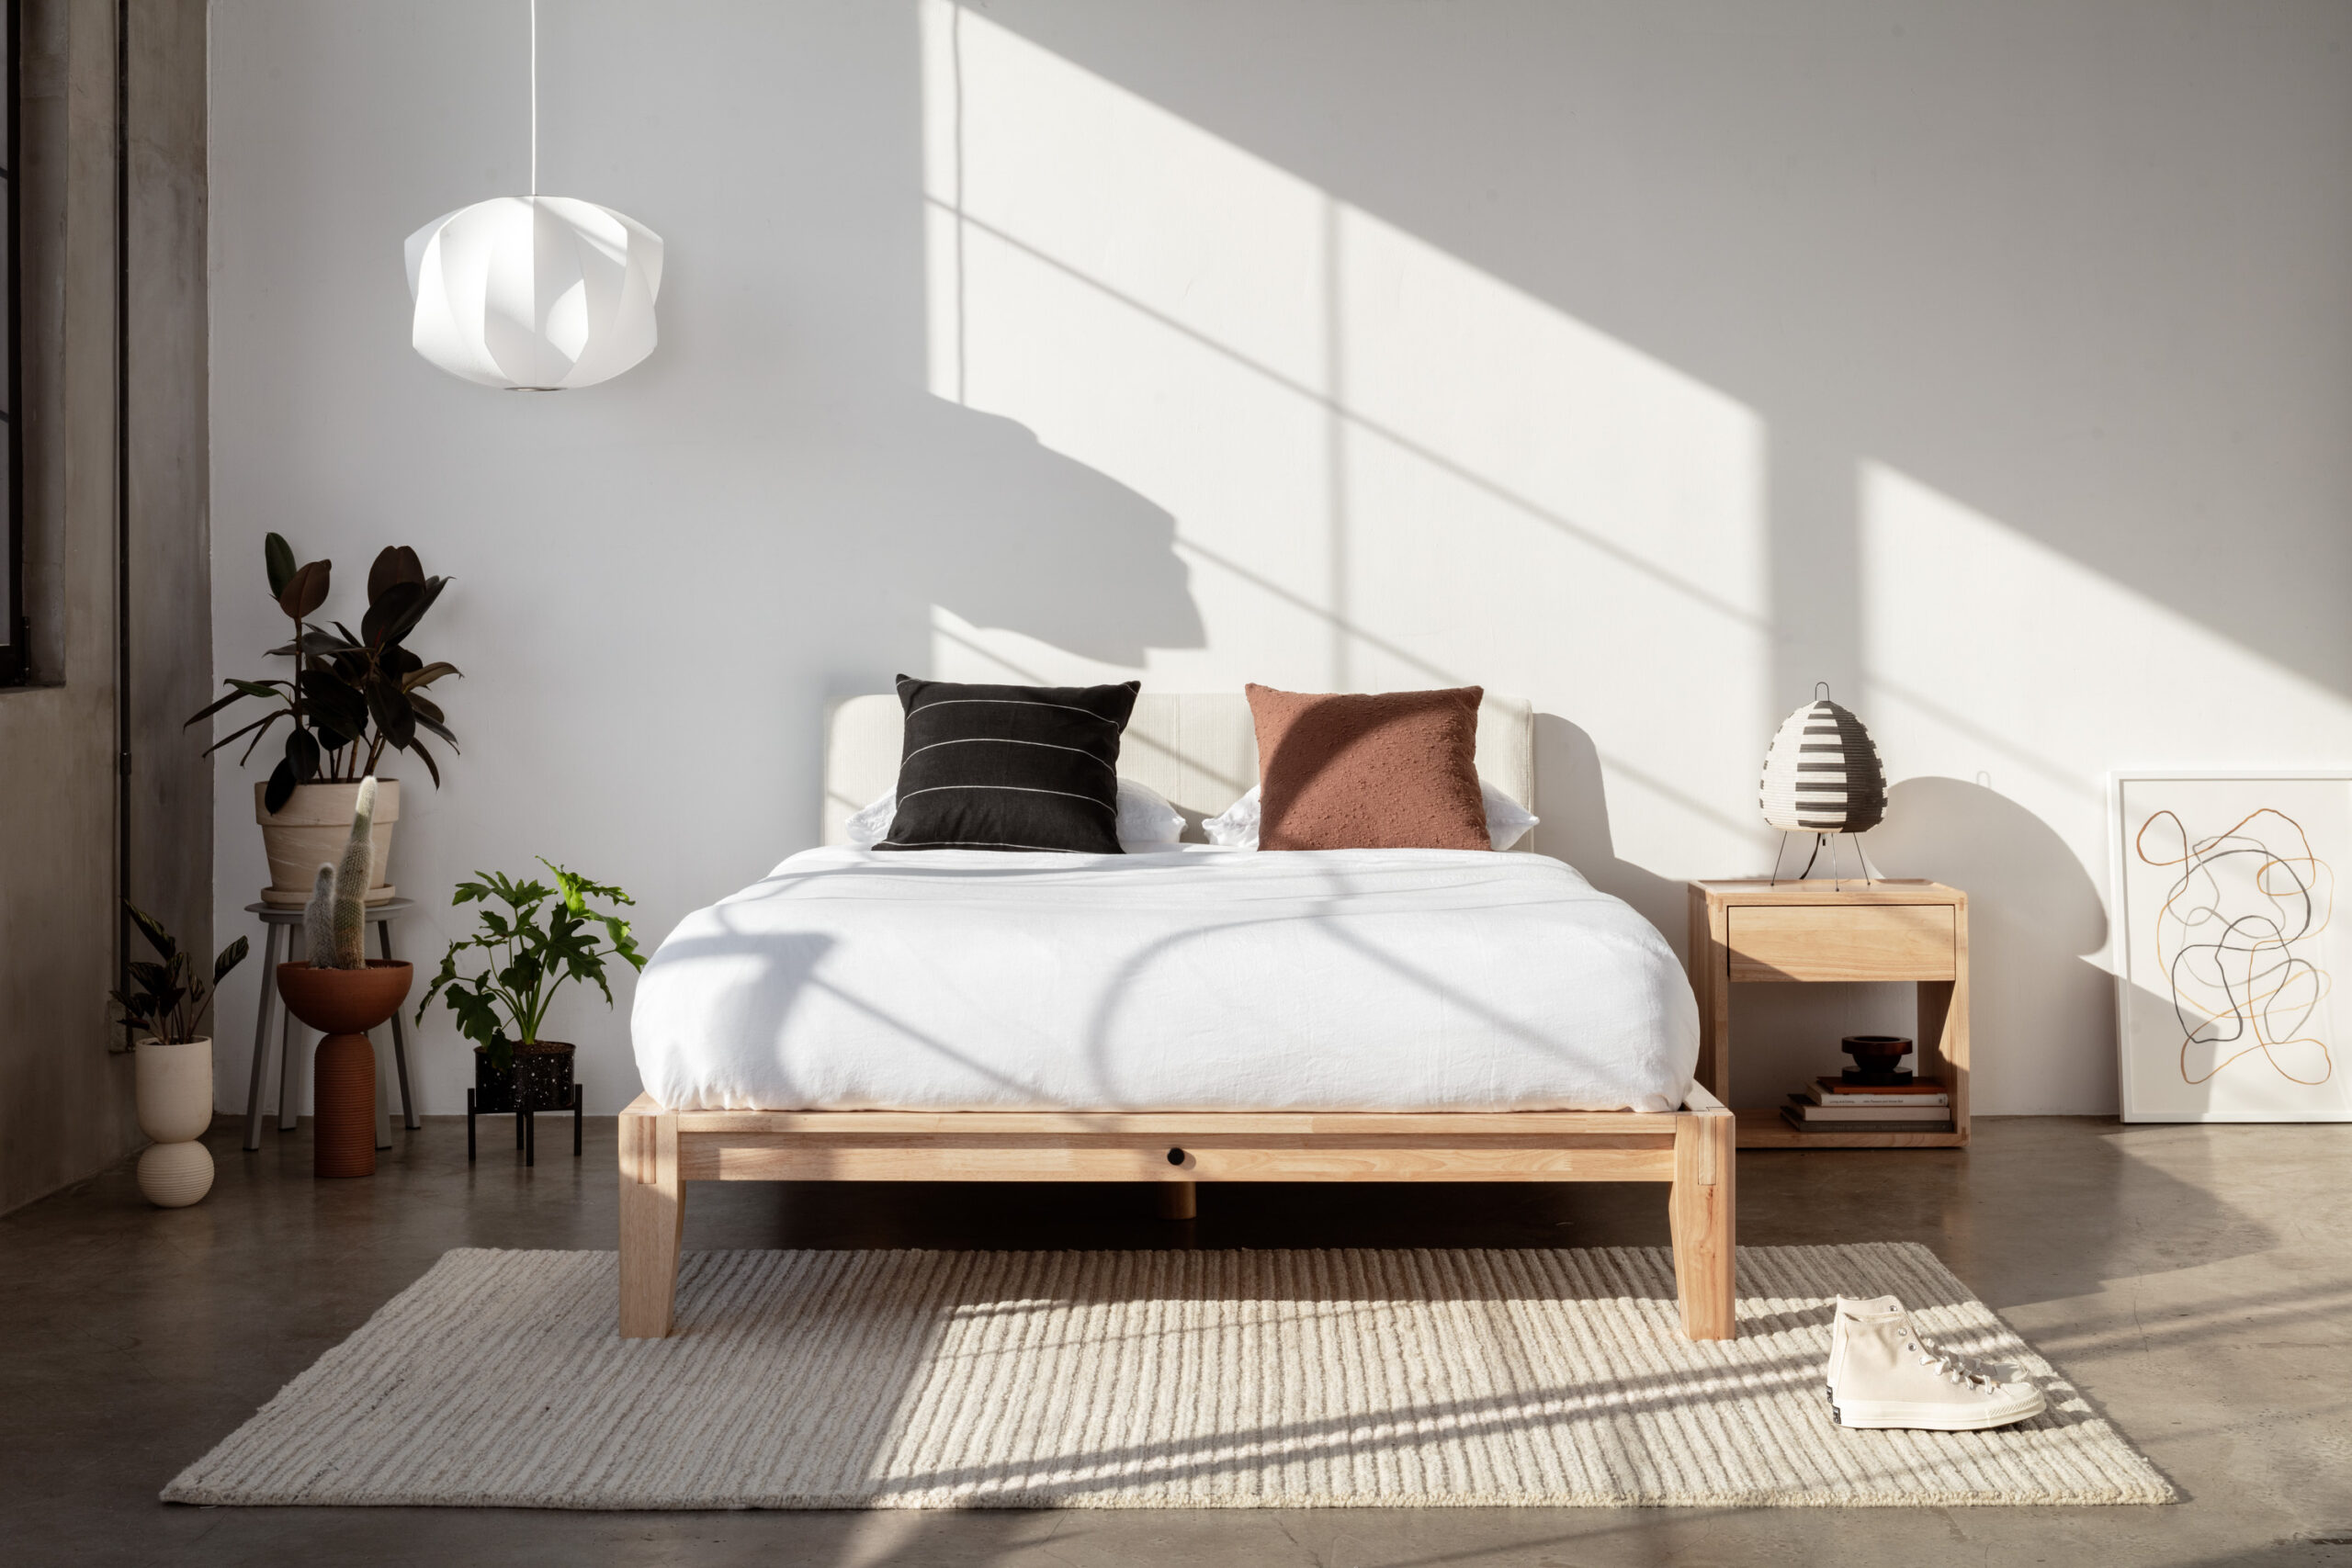 An Honest Thuma Bed Frame Review From an Editor | Well+Good